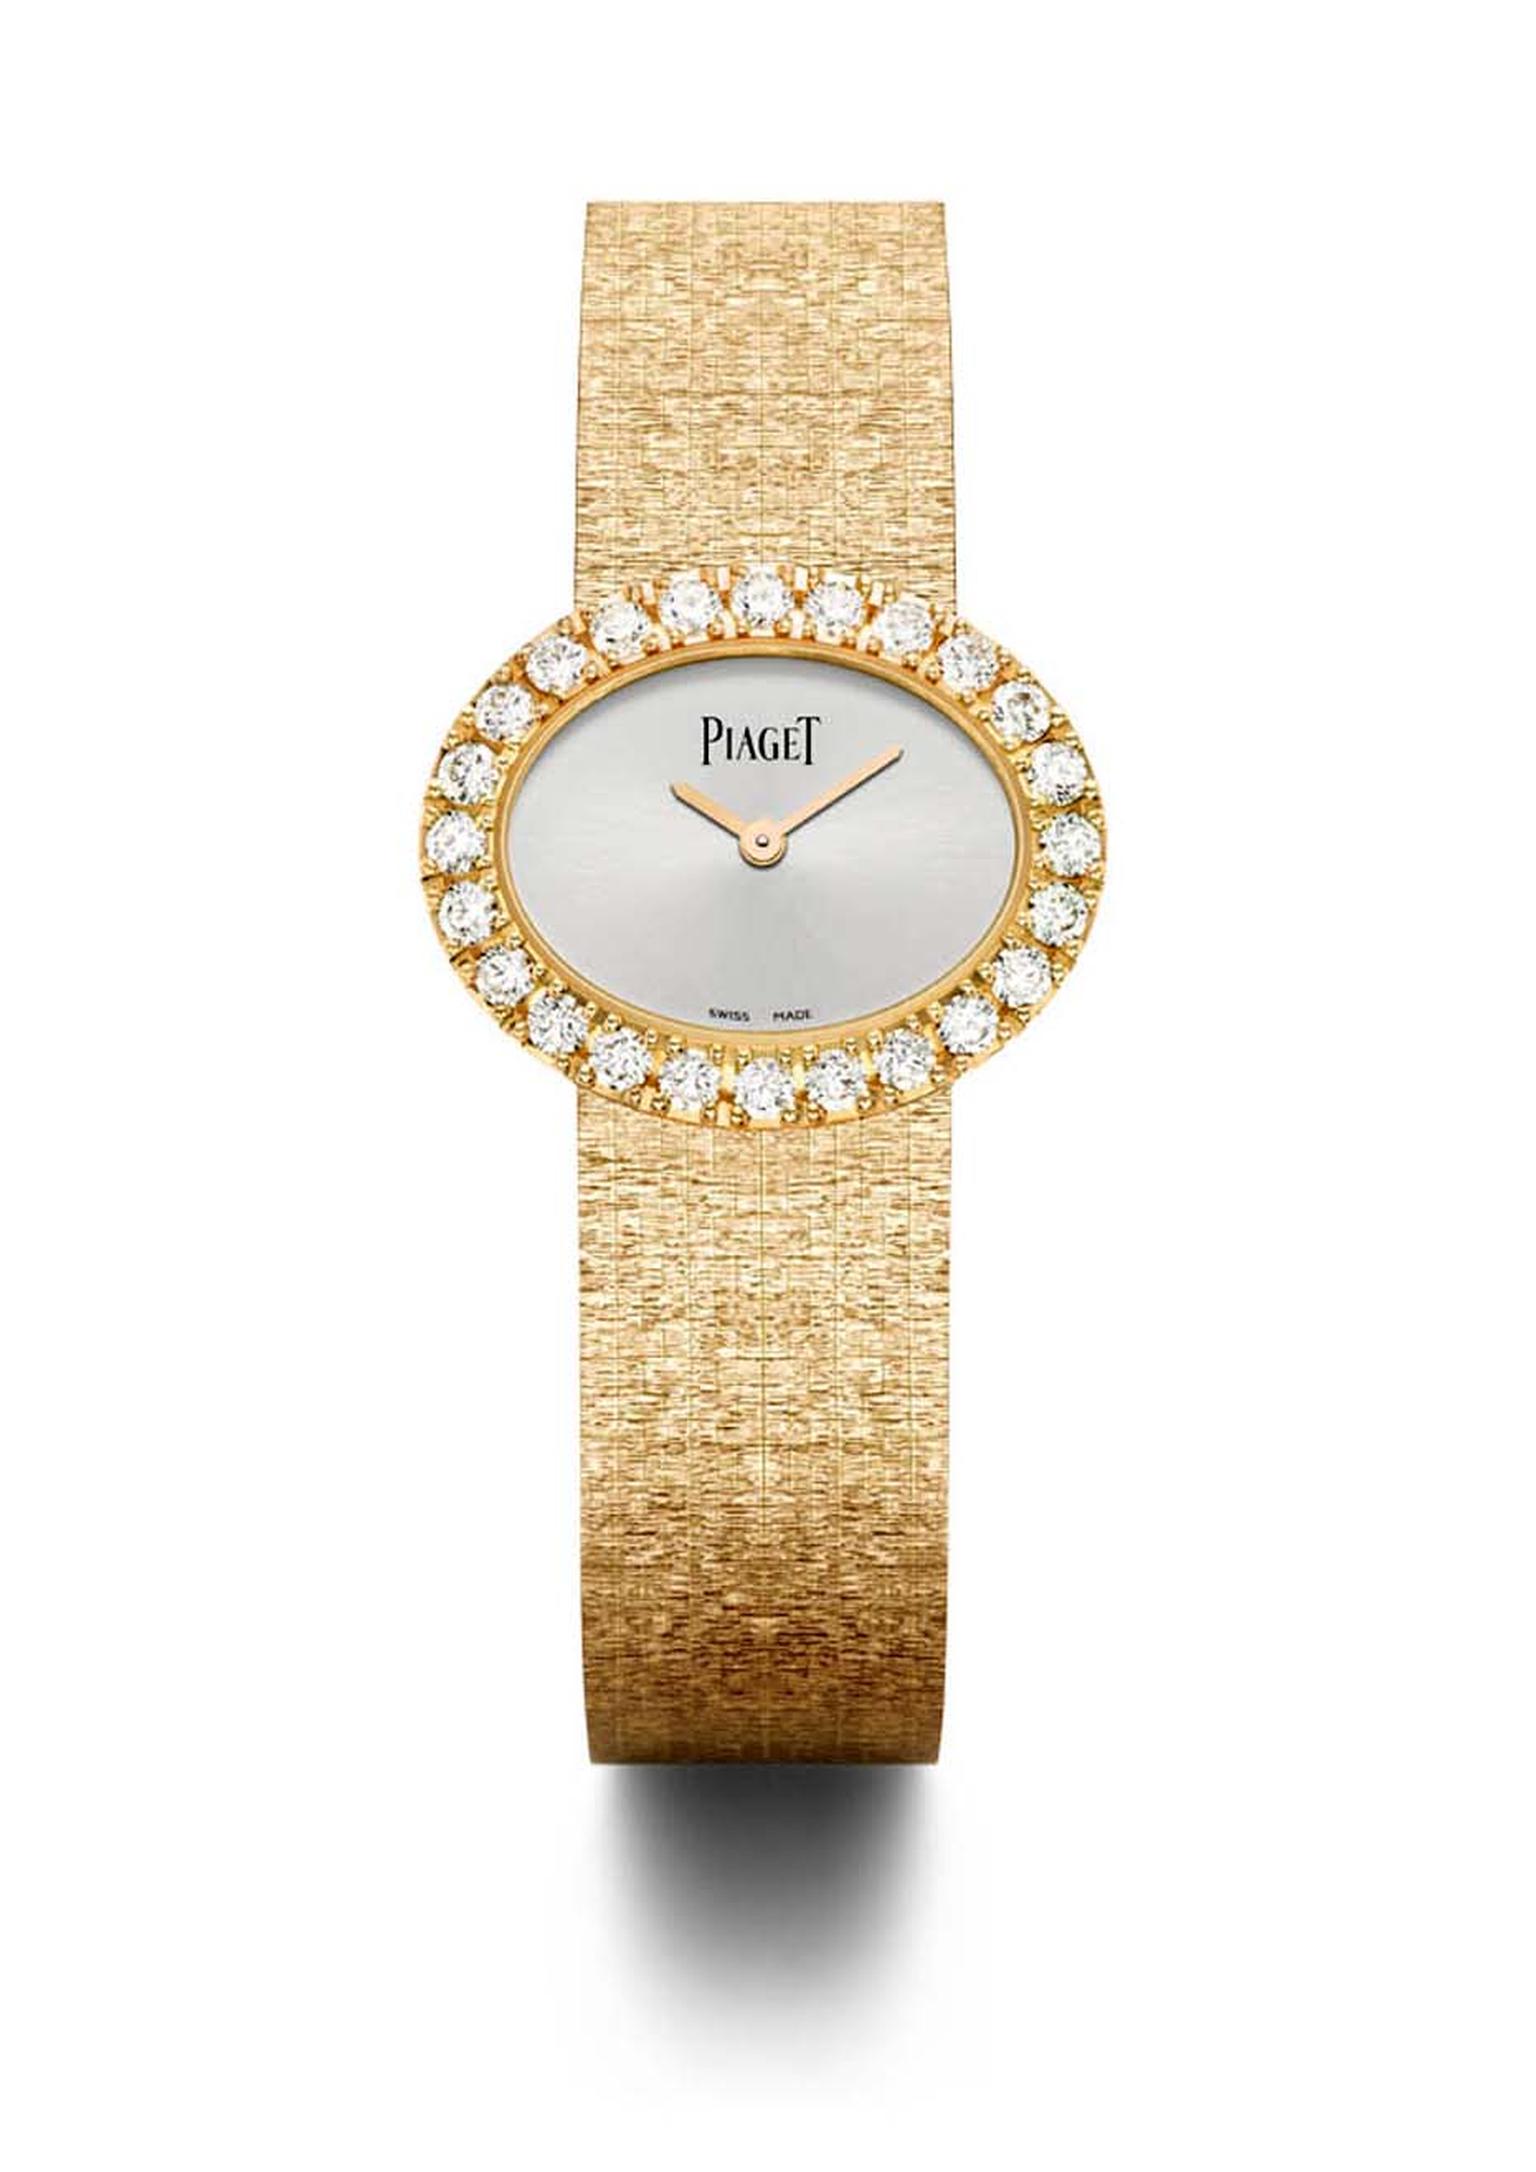 The Piaget watch gold bracelet is a work of goldsmithing prowess made to resemble gold textured fabric, which shimmers like a silk ribbon on the wrist.